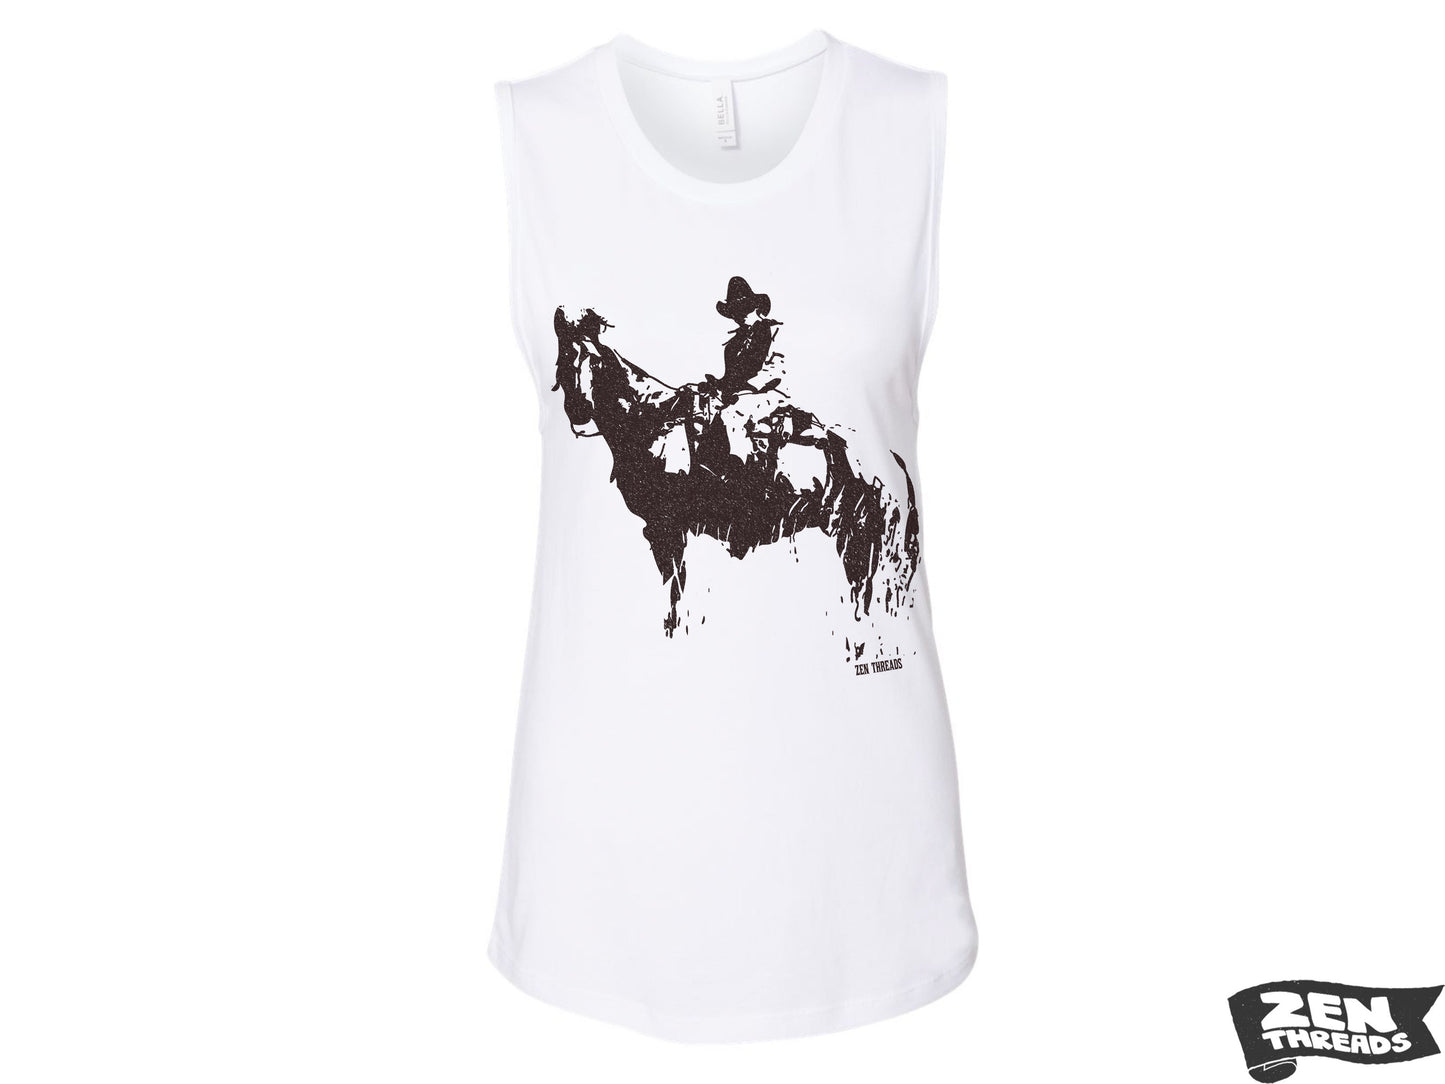 Womens COWBOY and HORSE Muscle Tank workout fitness tee western theme top t-shirt texas wrangler desert Yellowstone western wear